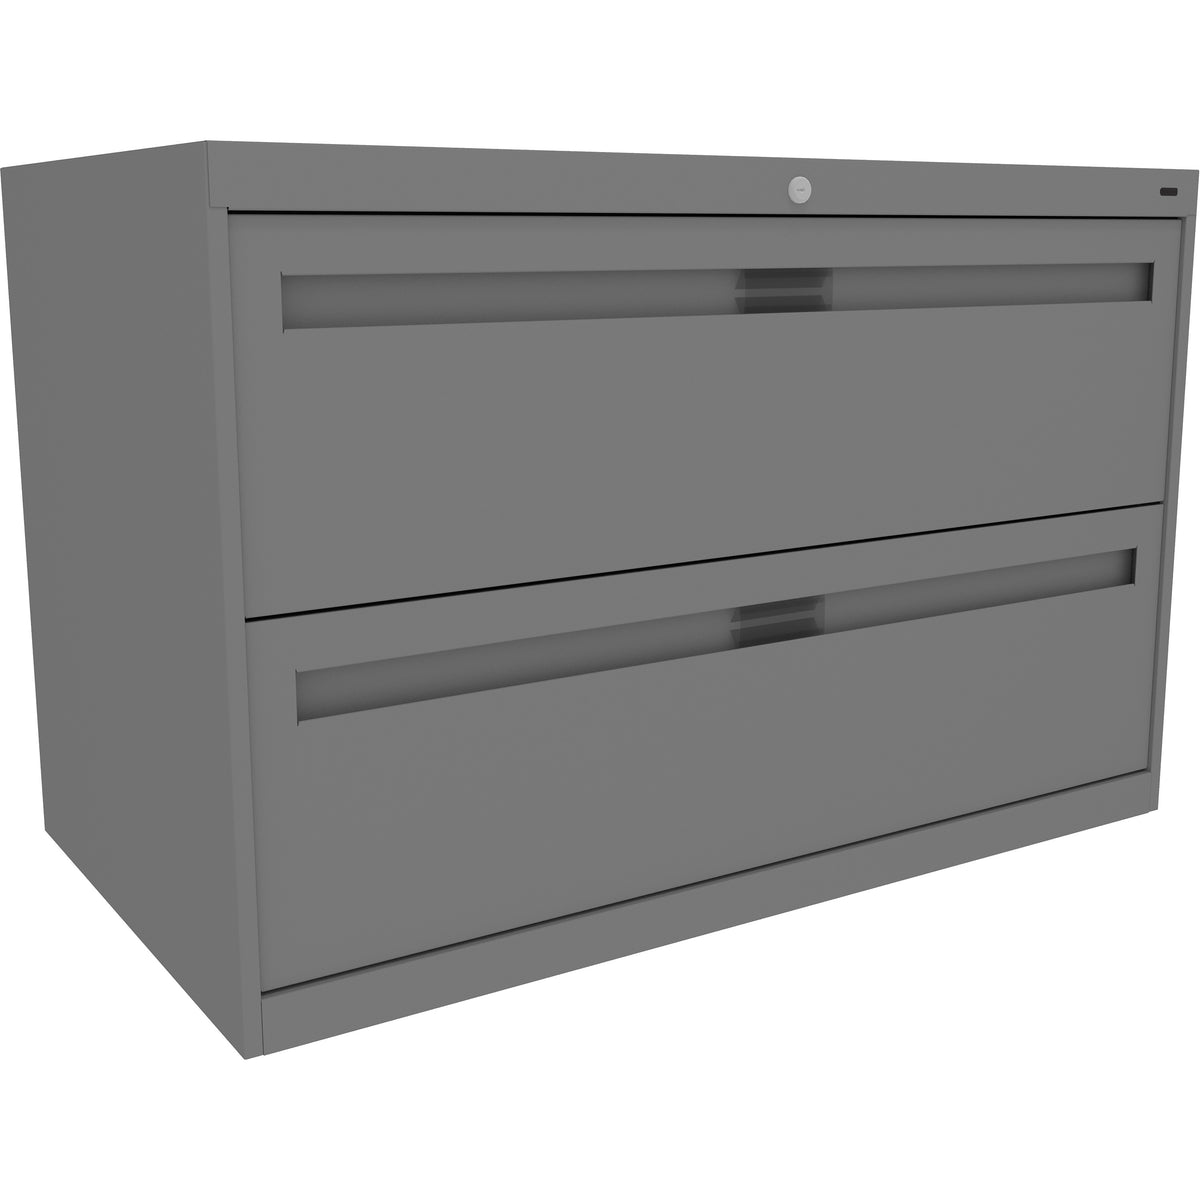 Tennsco 42" Wide Two-Drawer Lateral File with Retractable Doors, LPL4224L21